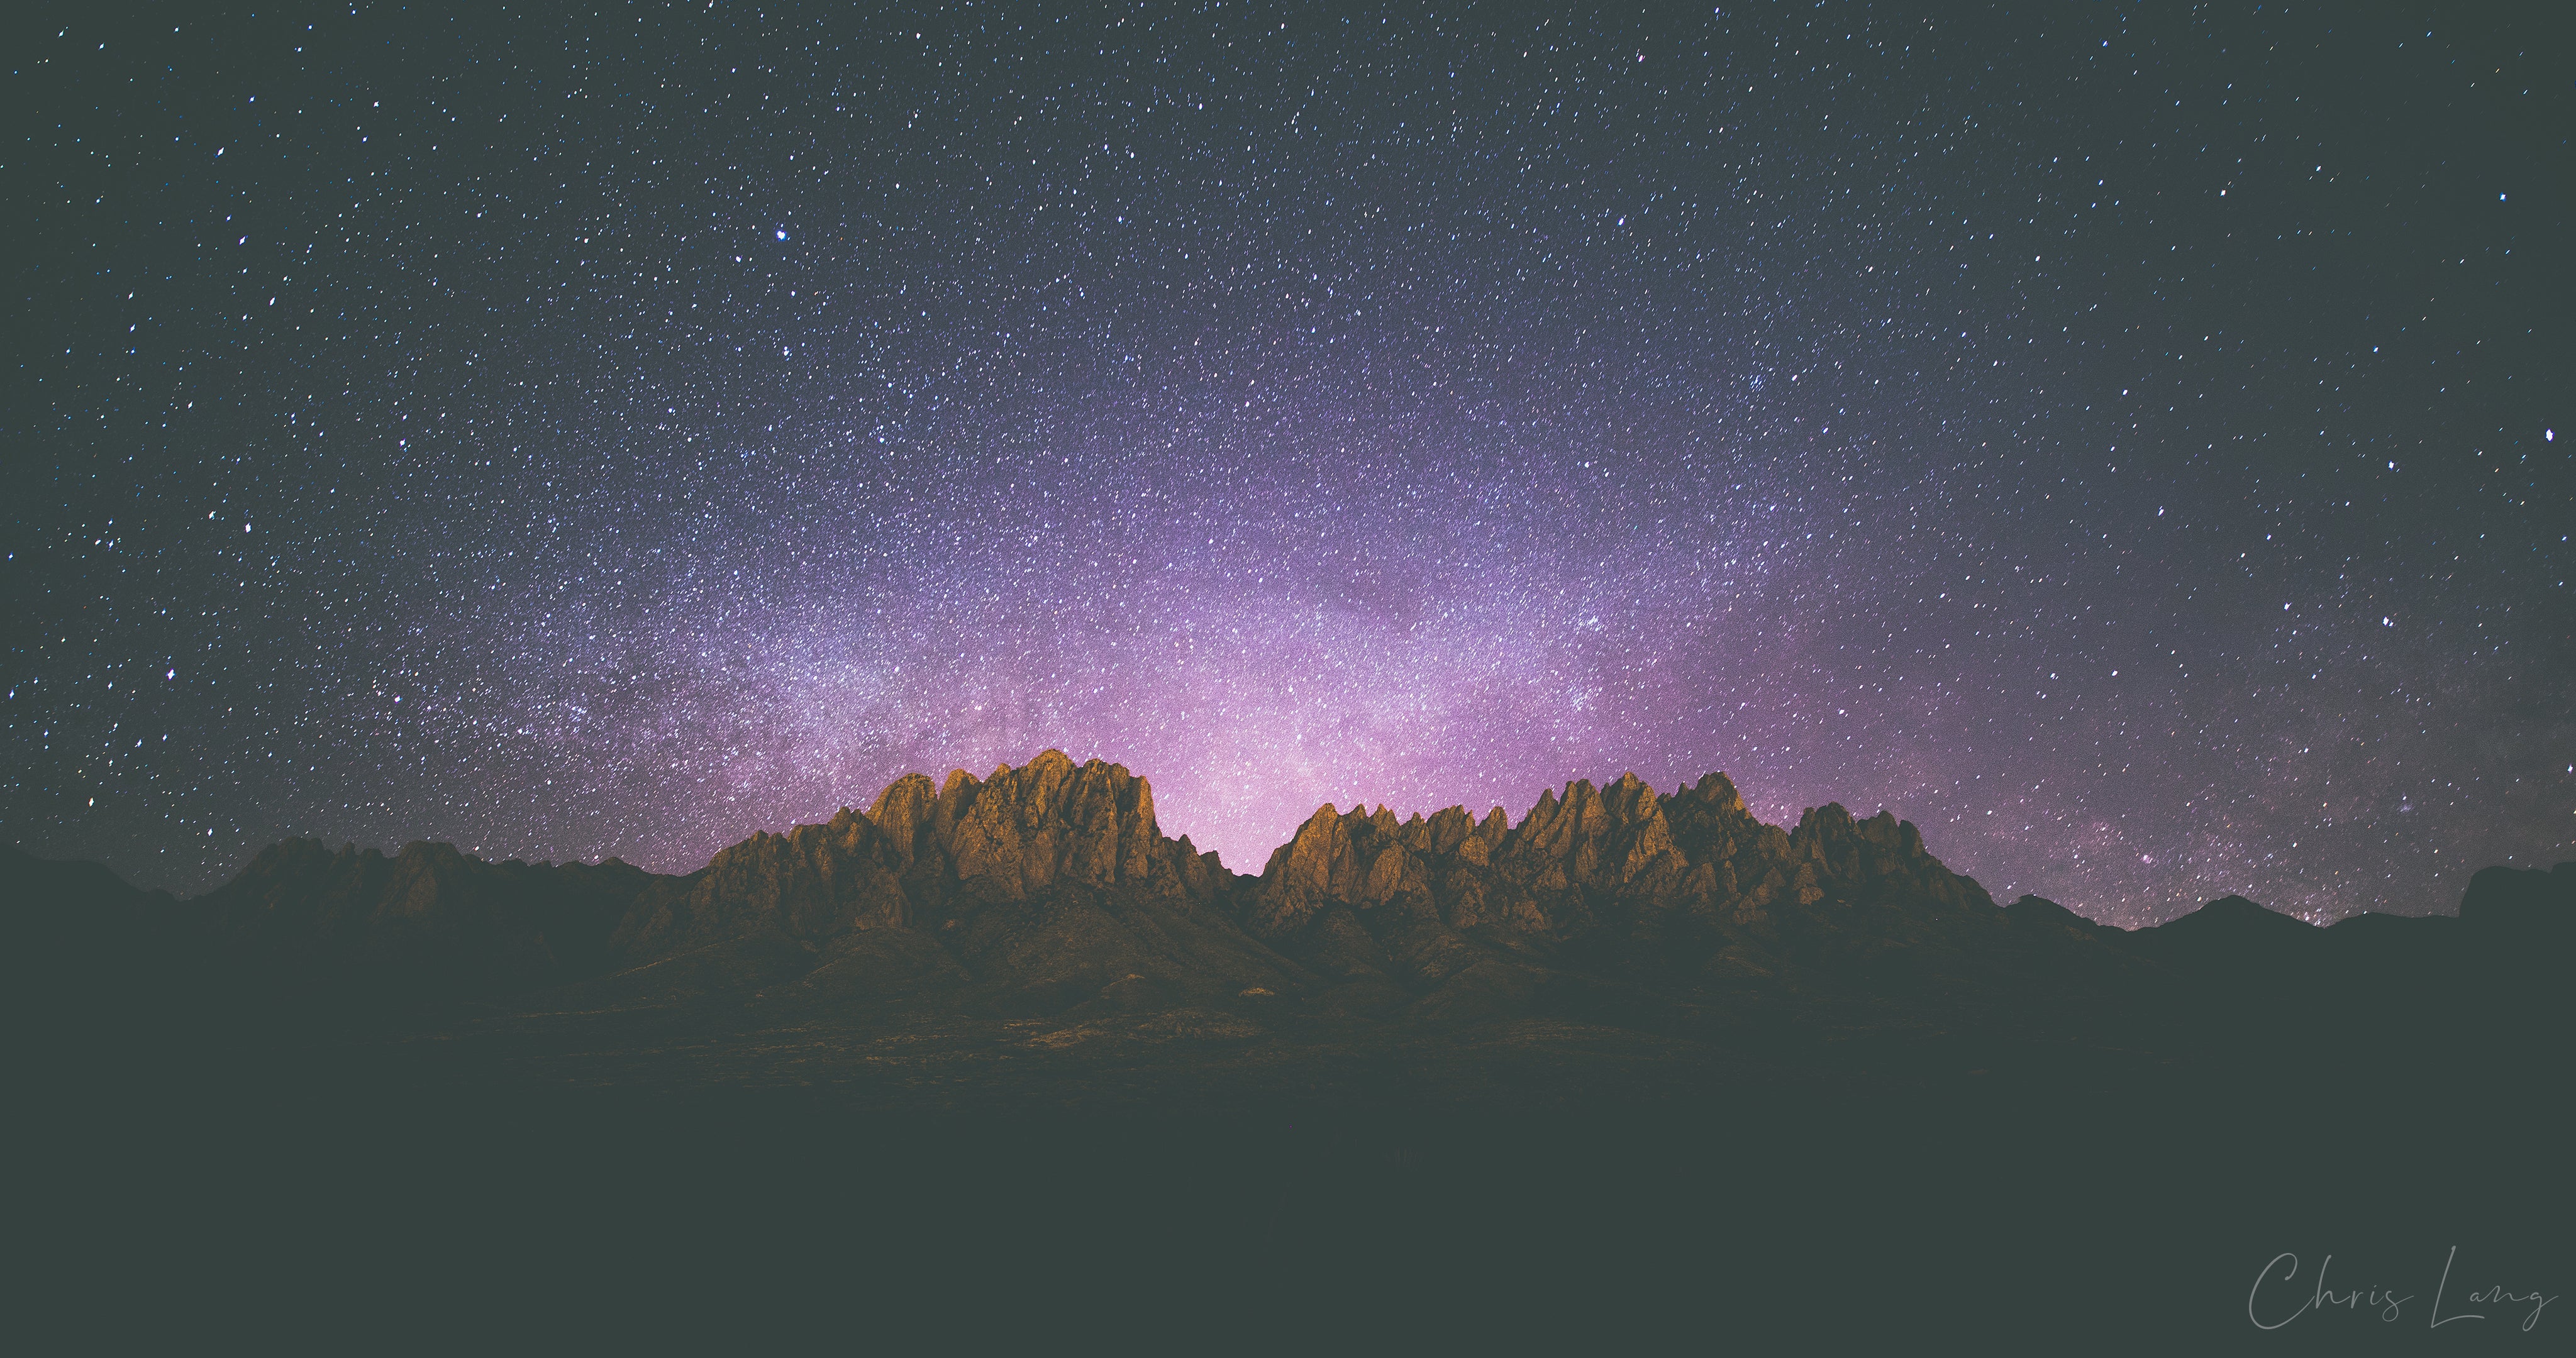 Photography: Explosion of Stars - Organ Mountain Outfitters